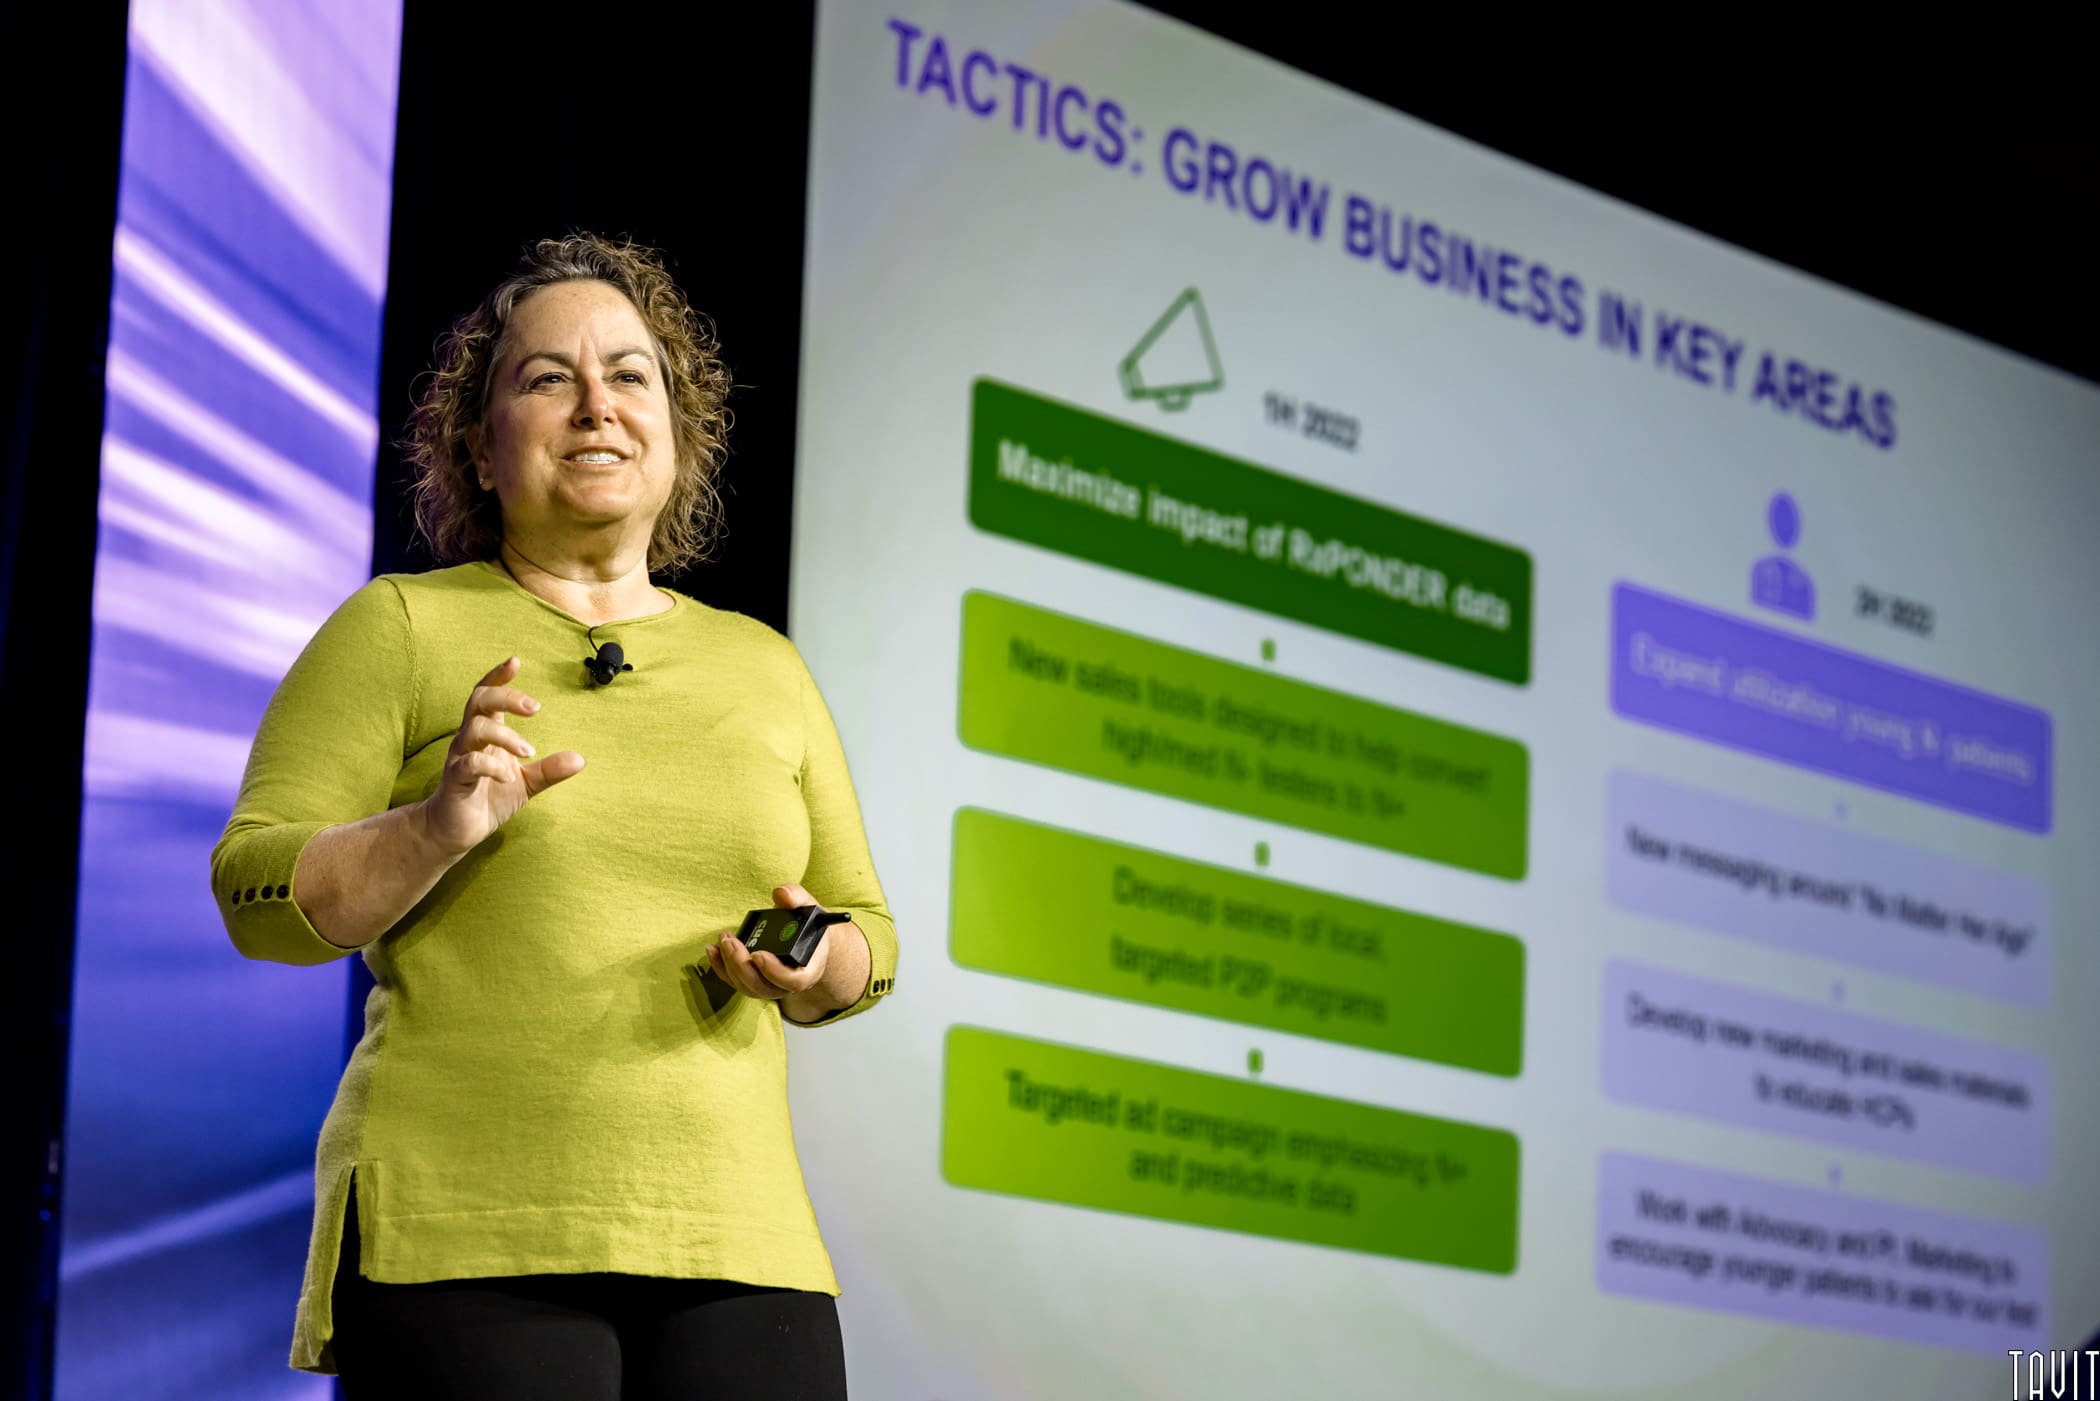 Woman giving business presentation on stage